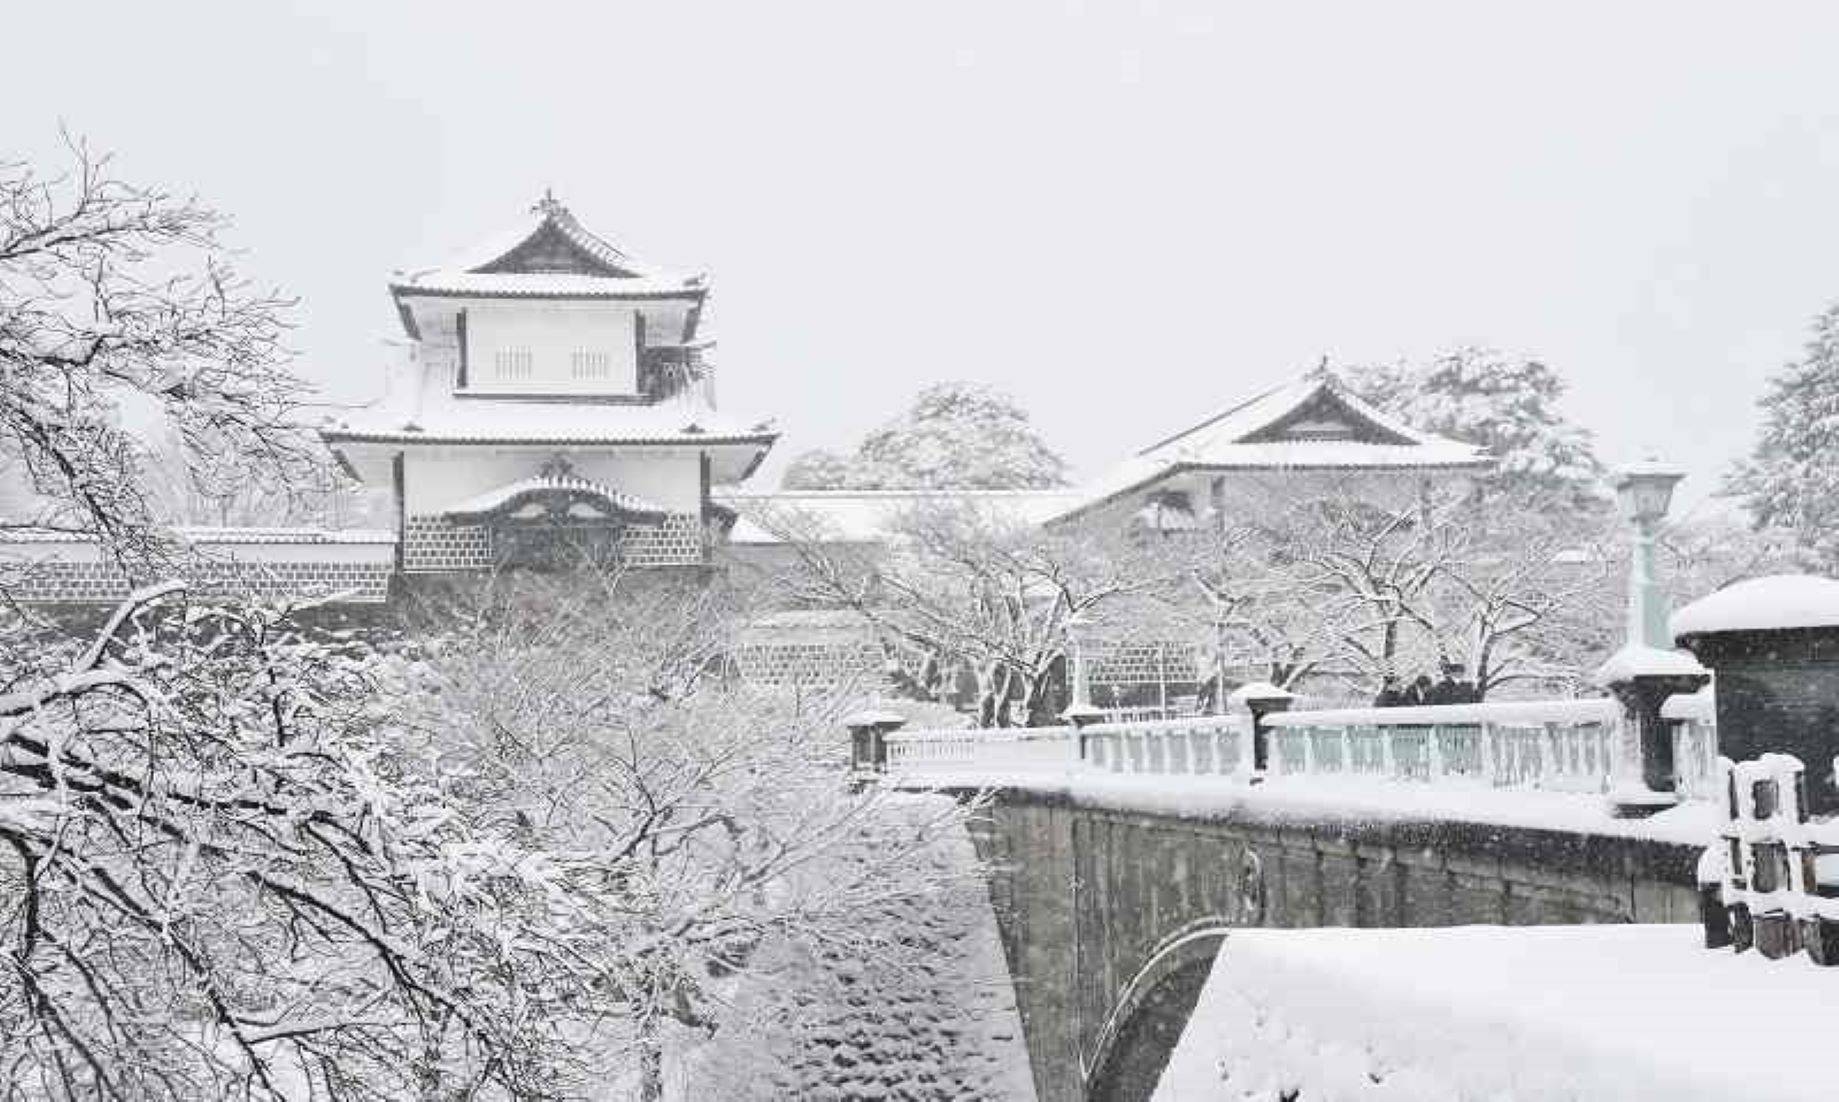 Northern Japan Braces For Heavy Snow, Gale-Force Winds Amid Volatile Atmospheric Conditions